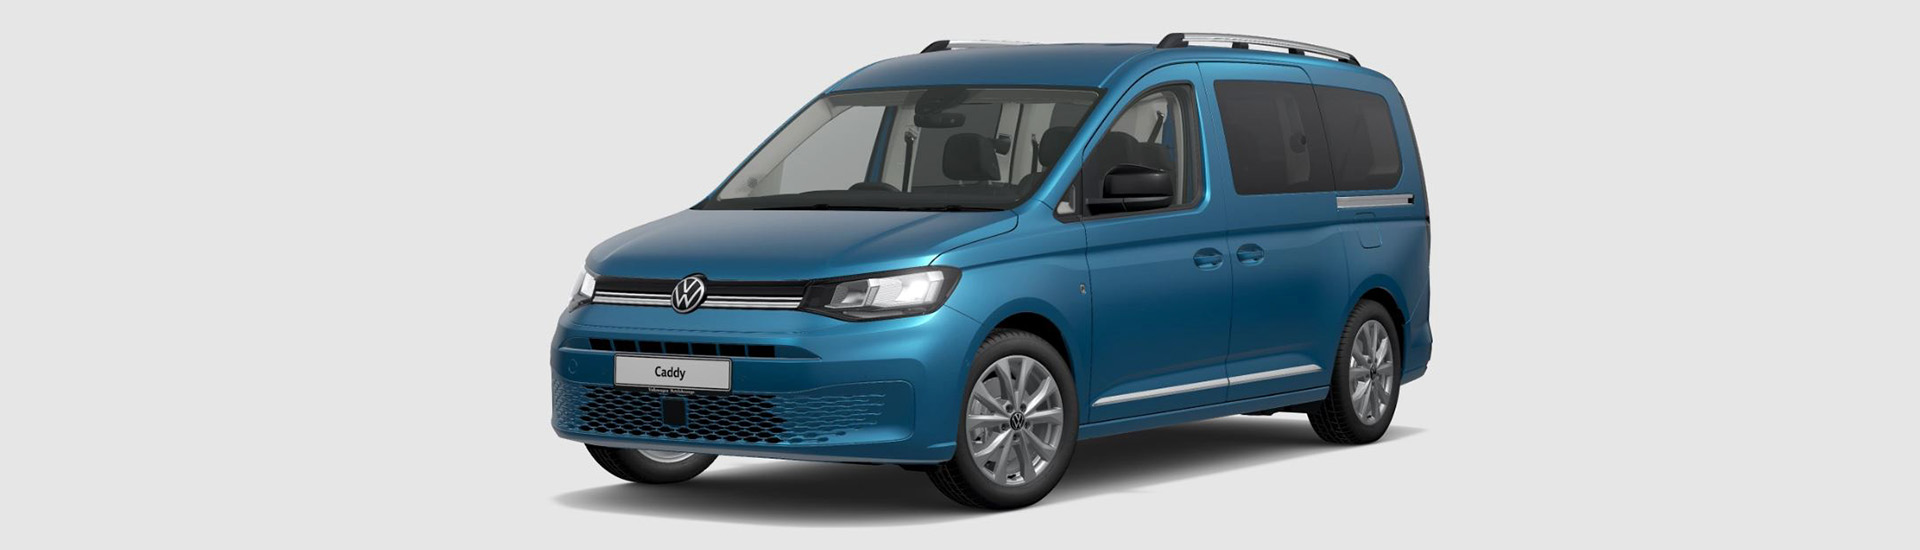 Volkswagen Caddy 2023: subtle changes coming for small van range - Chasing  Cars